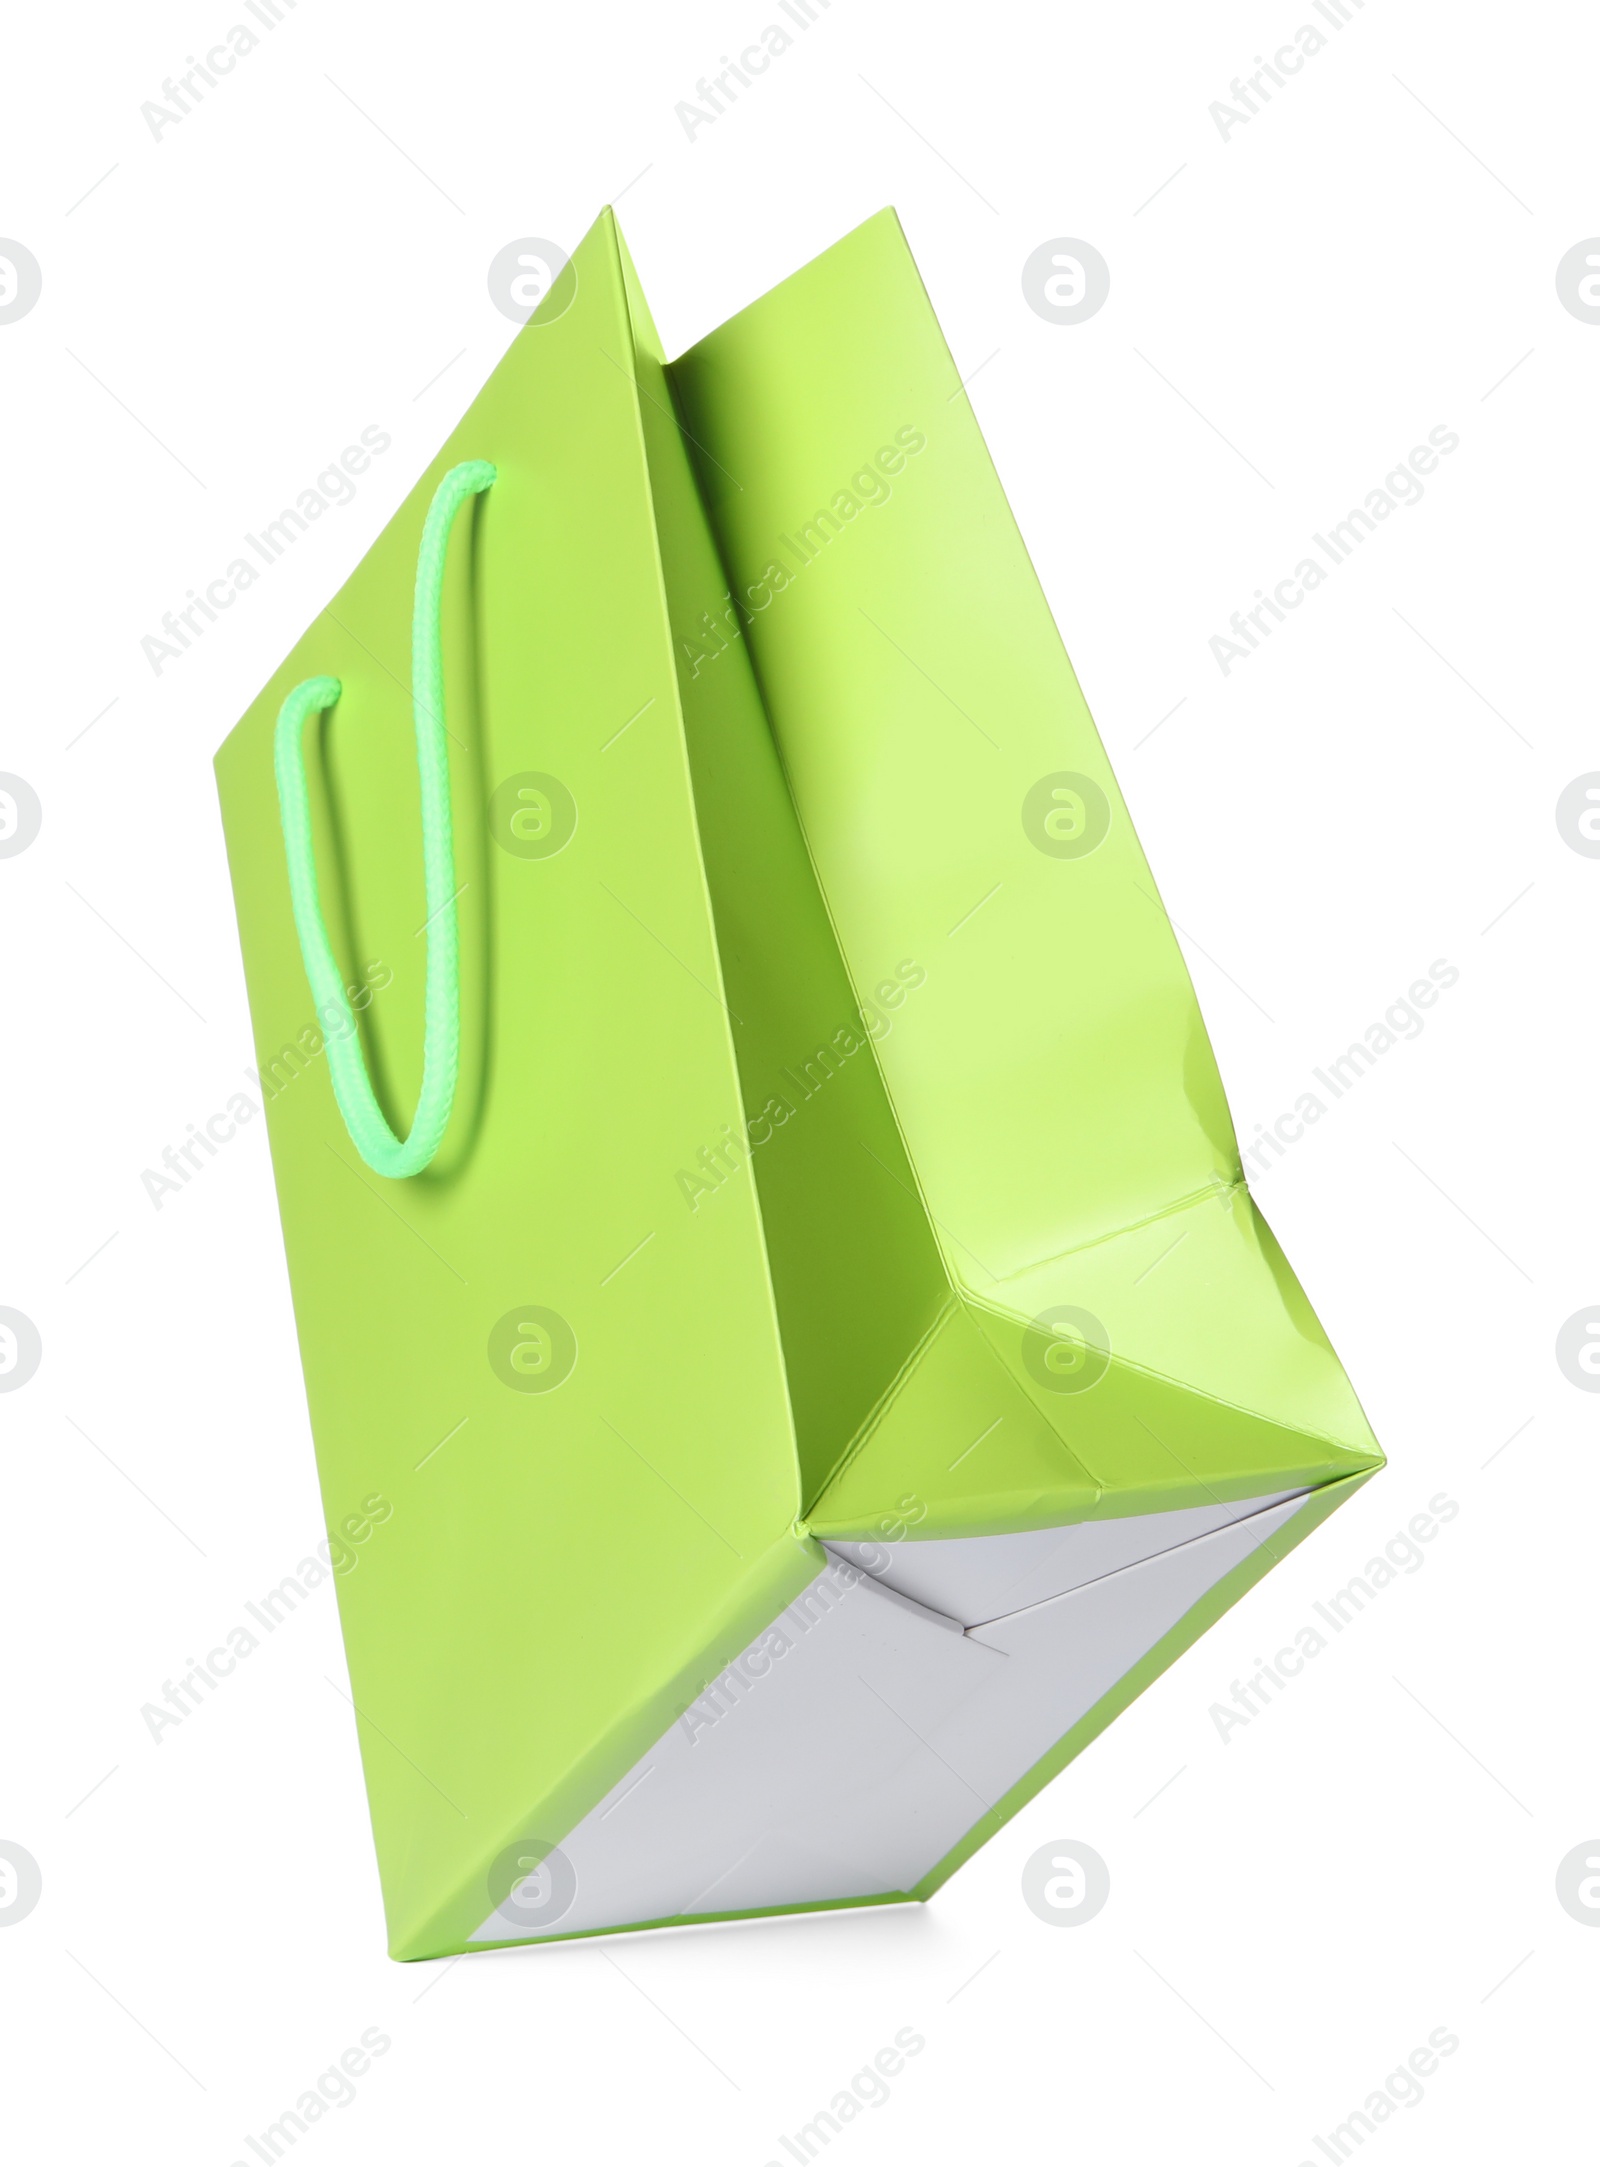 Photo of One green shopping bag isolated on white